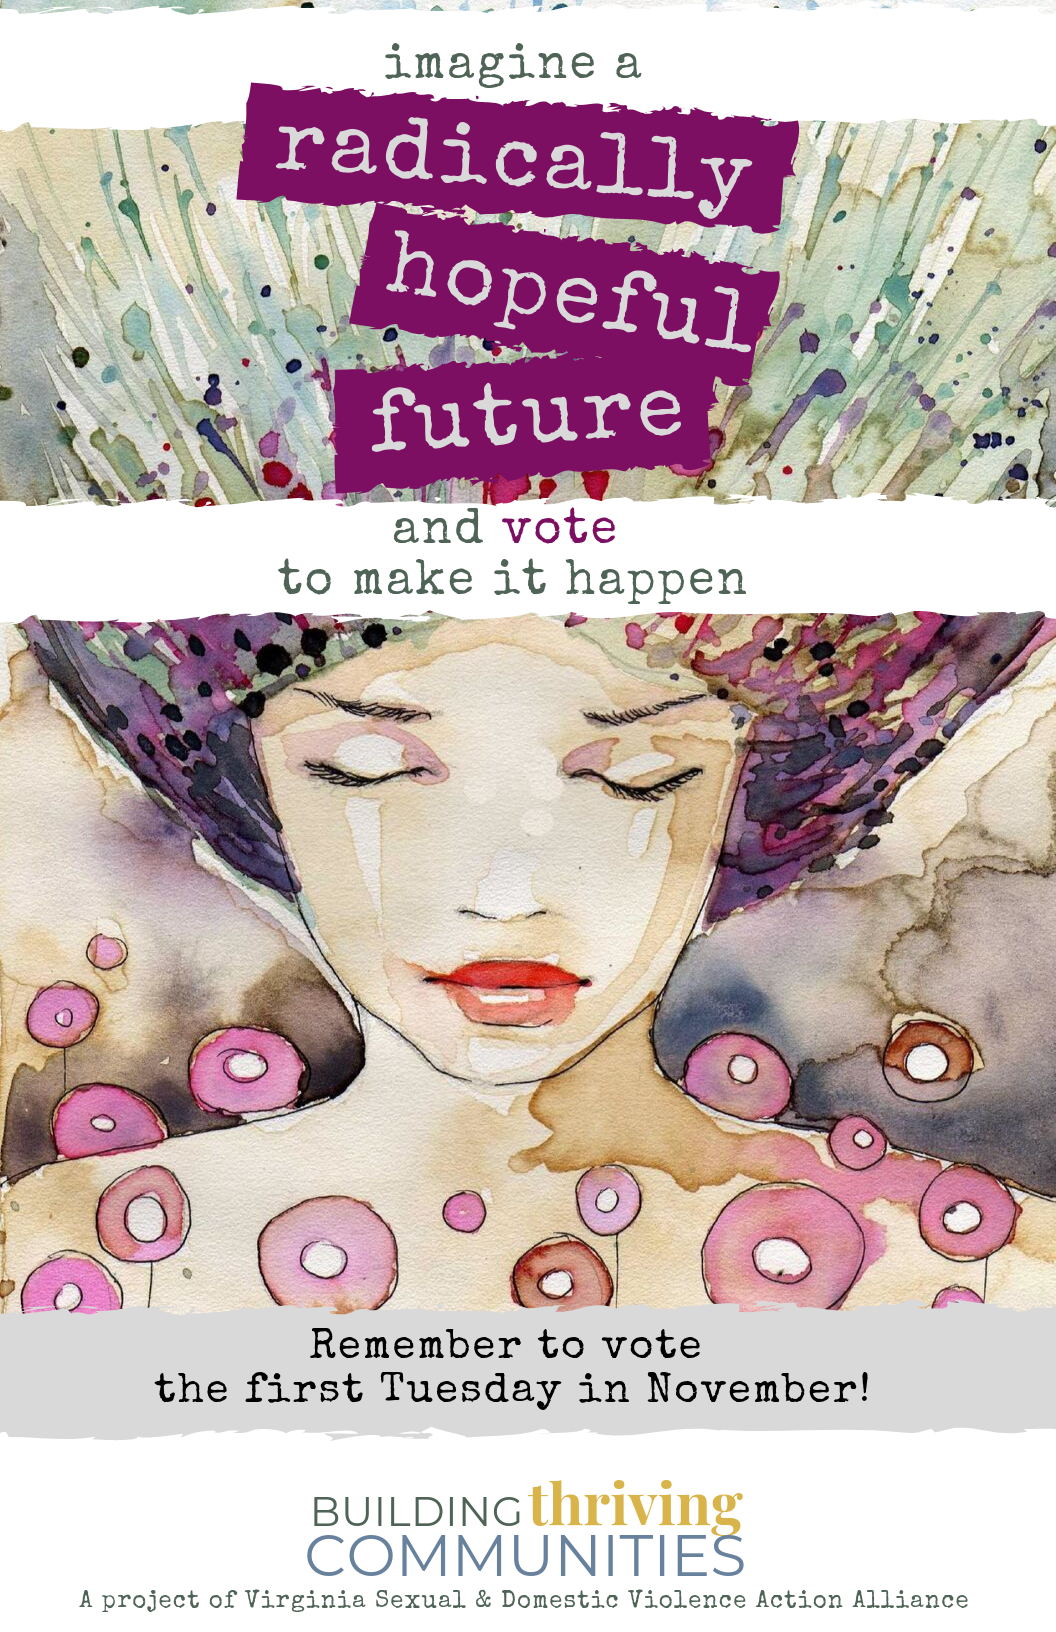 The background is a watercolor image of a woman's face with her eyes closed. In the foreground is text that says, "imagine a radically hopeful future and vote to make it happen. Remember to vote the first Tuesday in November!" with stylized text "Building Thriving Communities: a project of the Virginia Sexual and Domestic Violence Action Alliance."